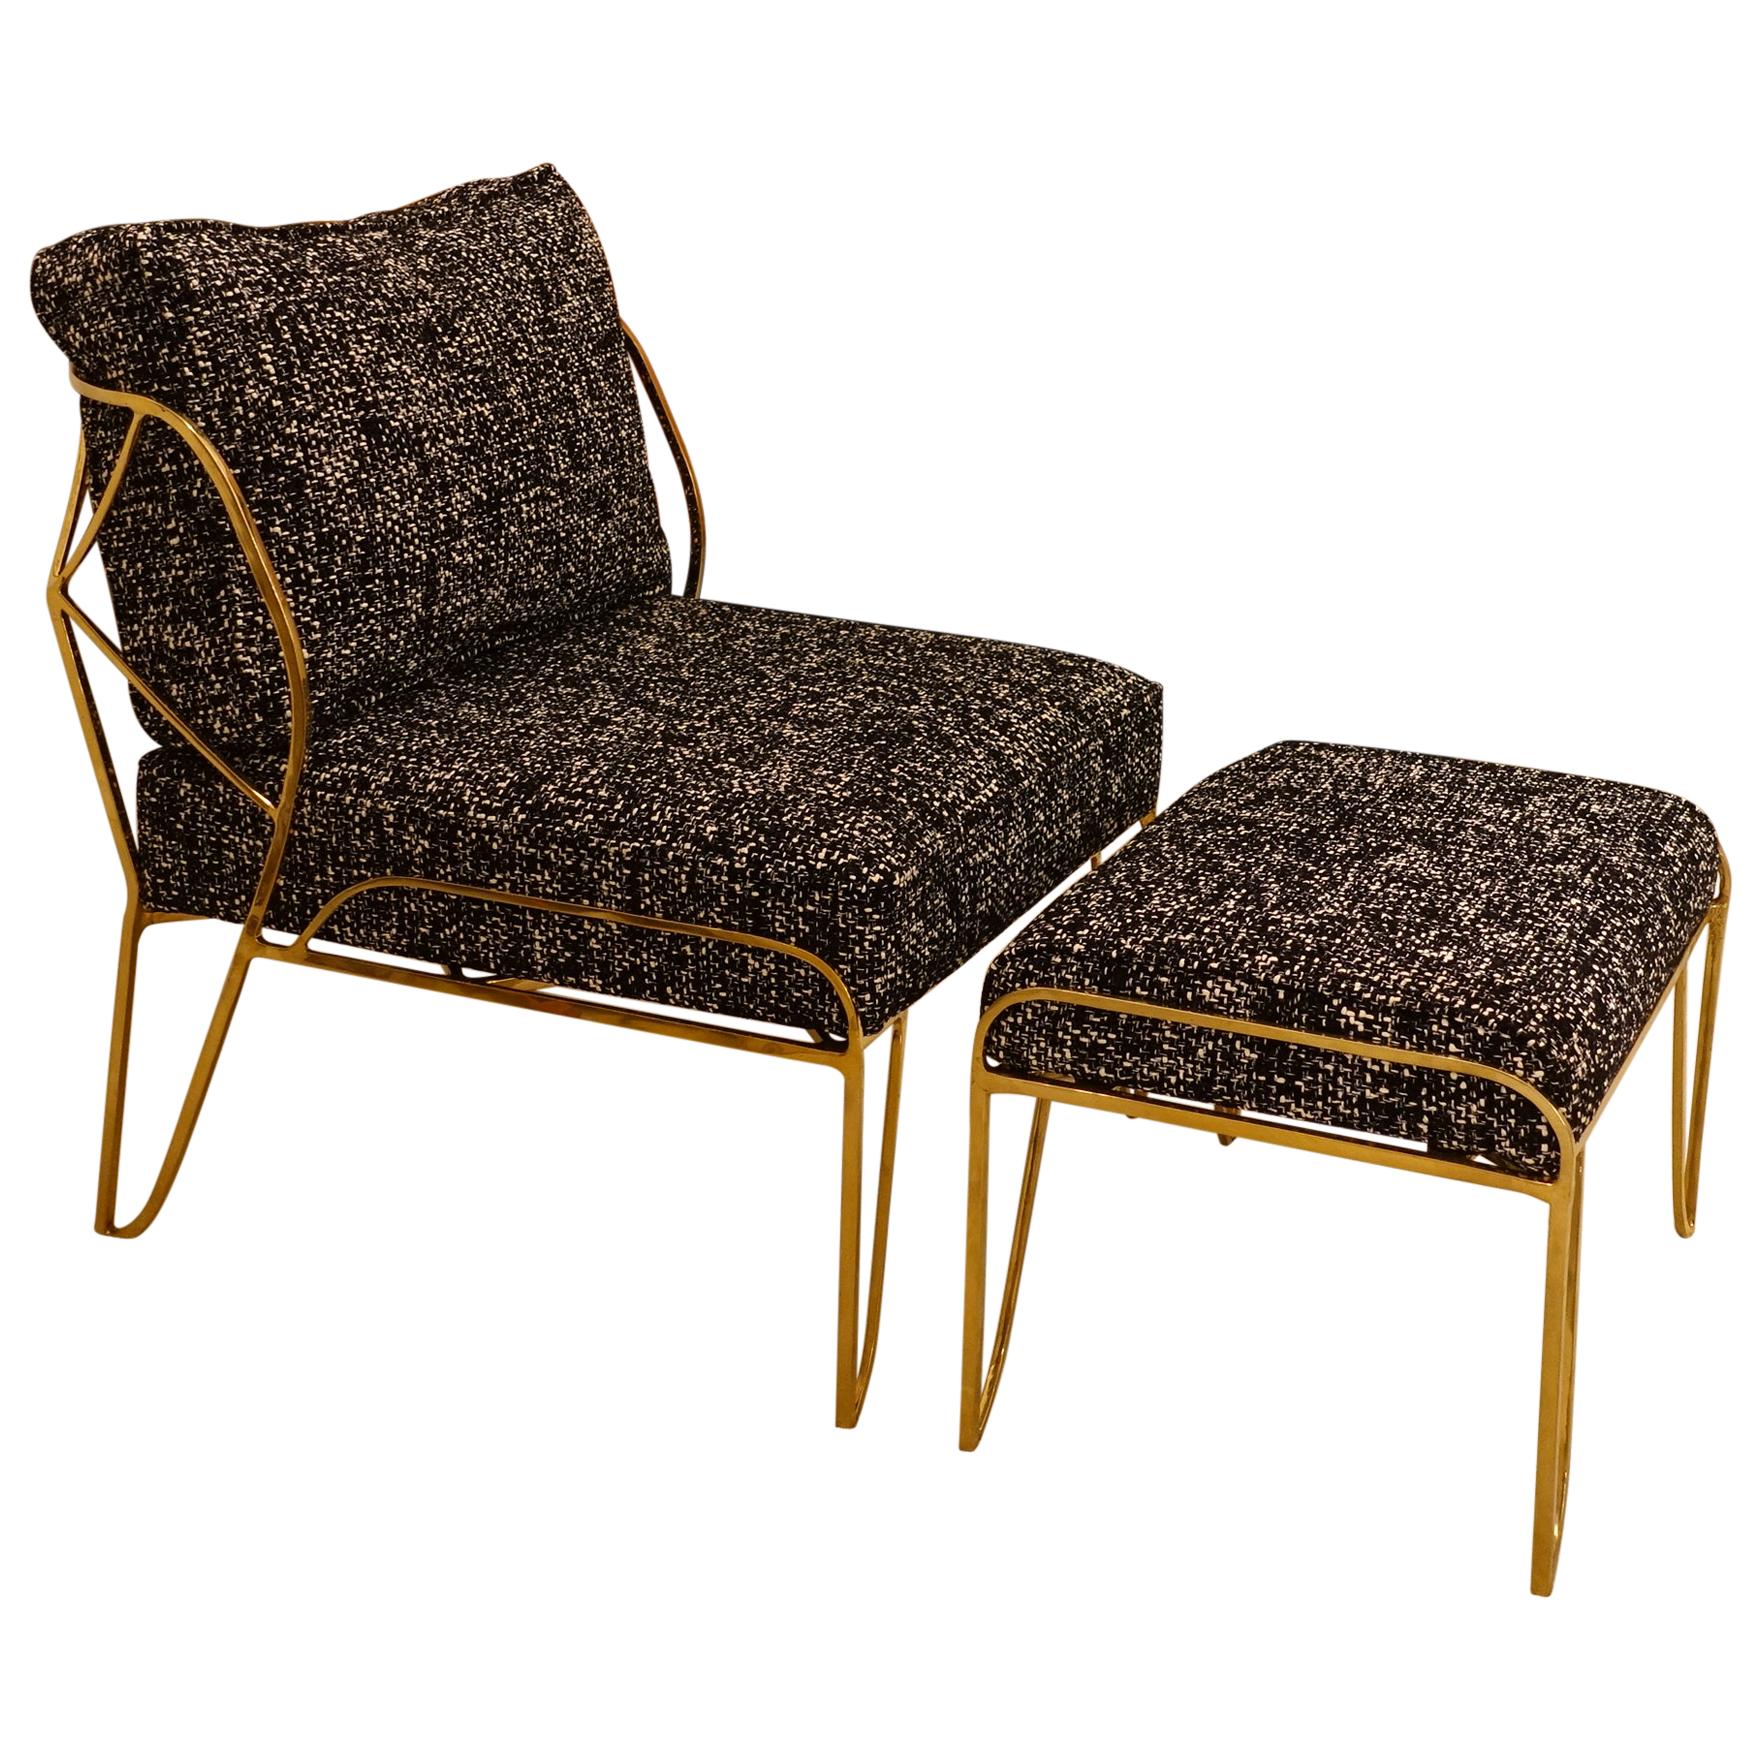 Contemporary Gilded Bronze Lounge Chair and Ottoman, Italy, 2020